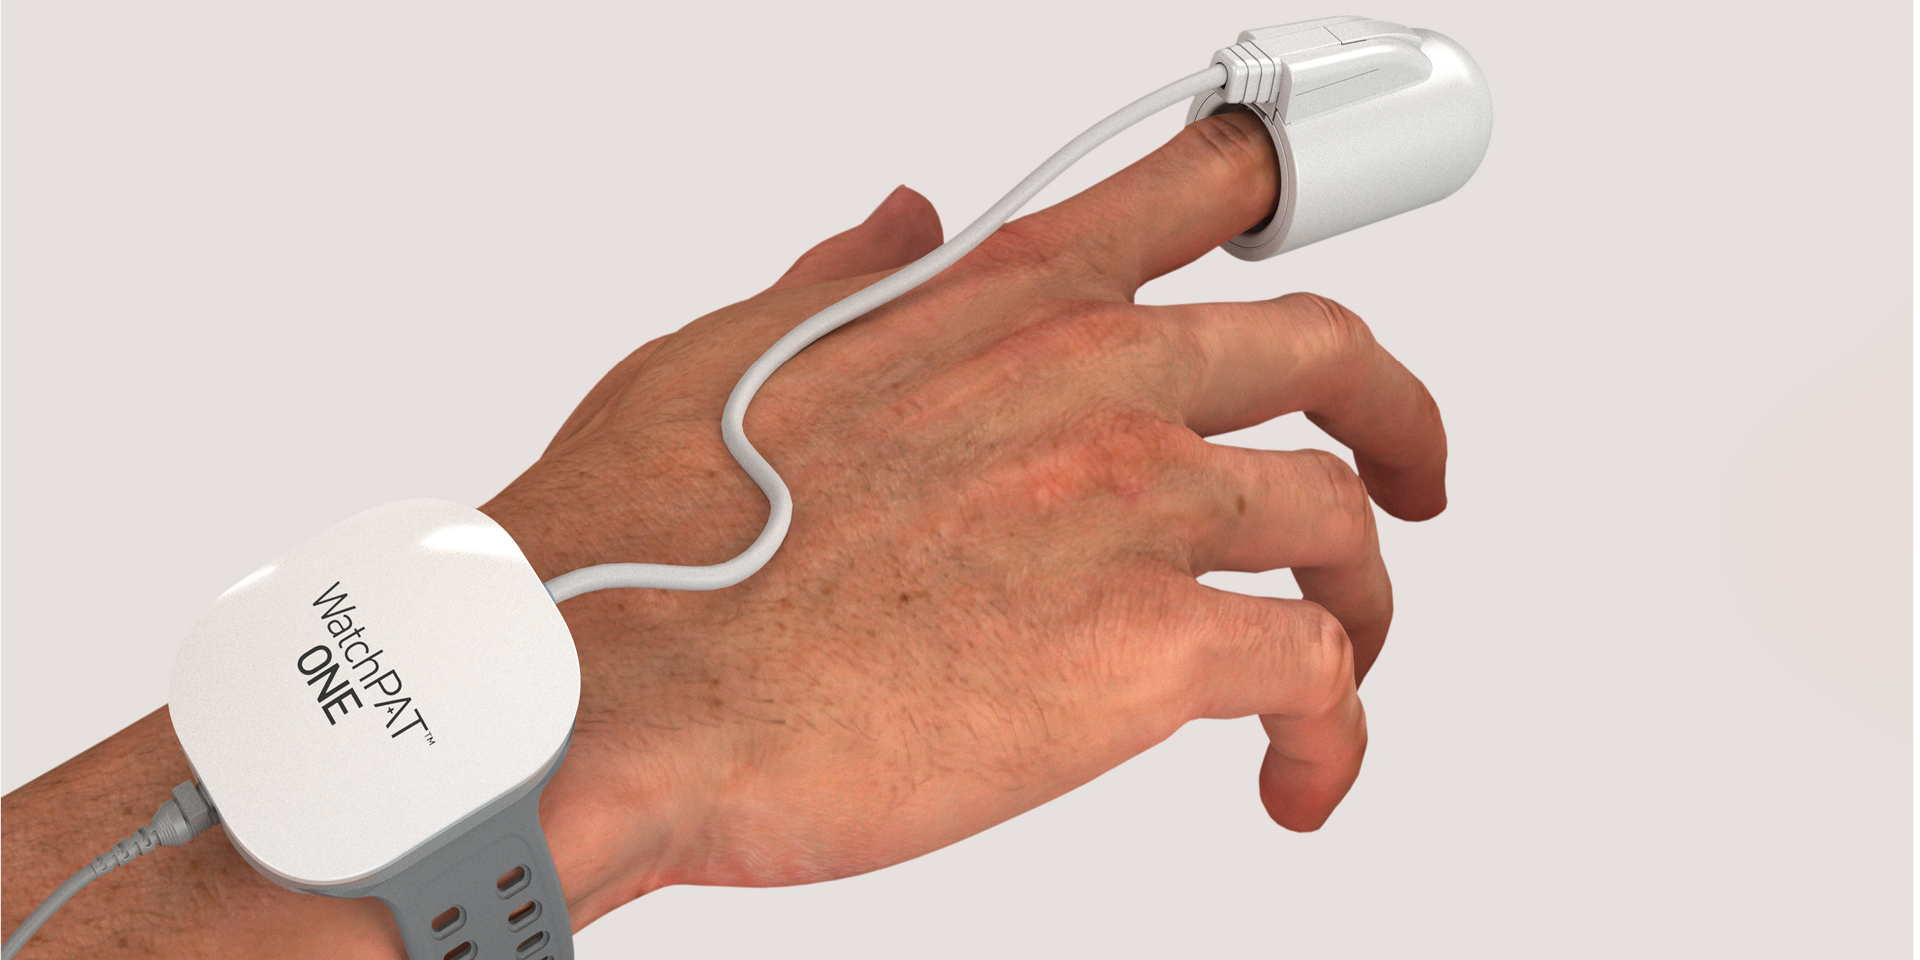 The hand and wrist of a person wearing the WatchPAT ONE home diagnostic sleep apnea test. A watch-like device is worn on the wrist, connected by a thin wire to a probe worn on the index finger.